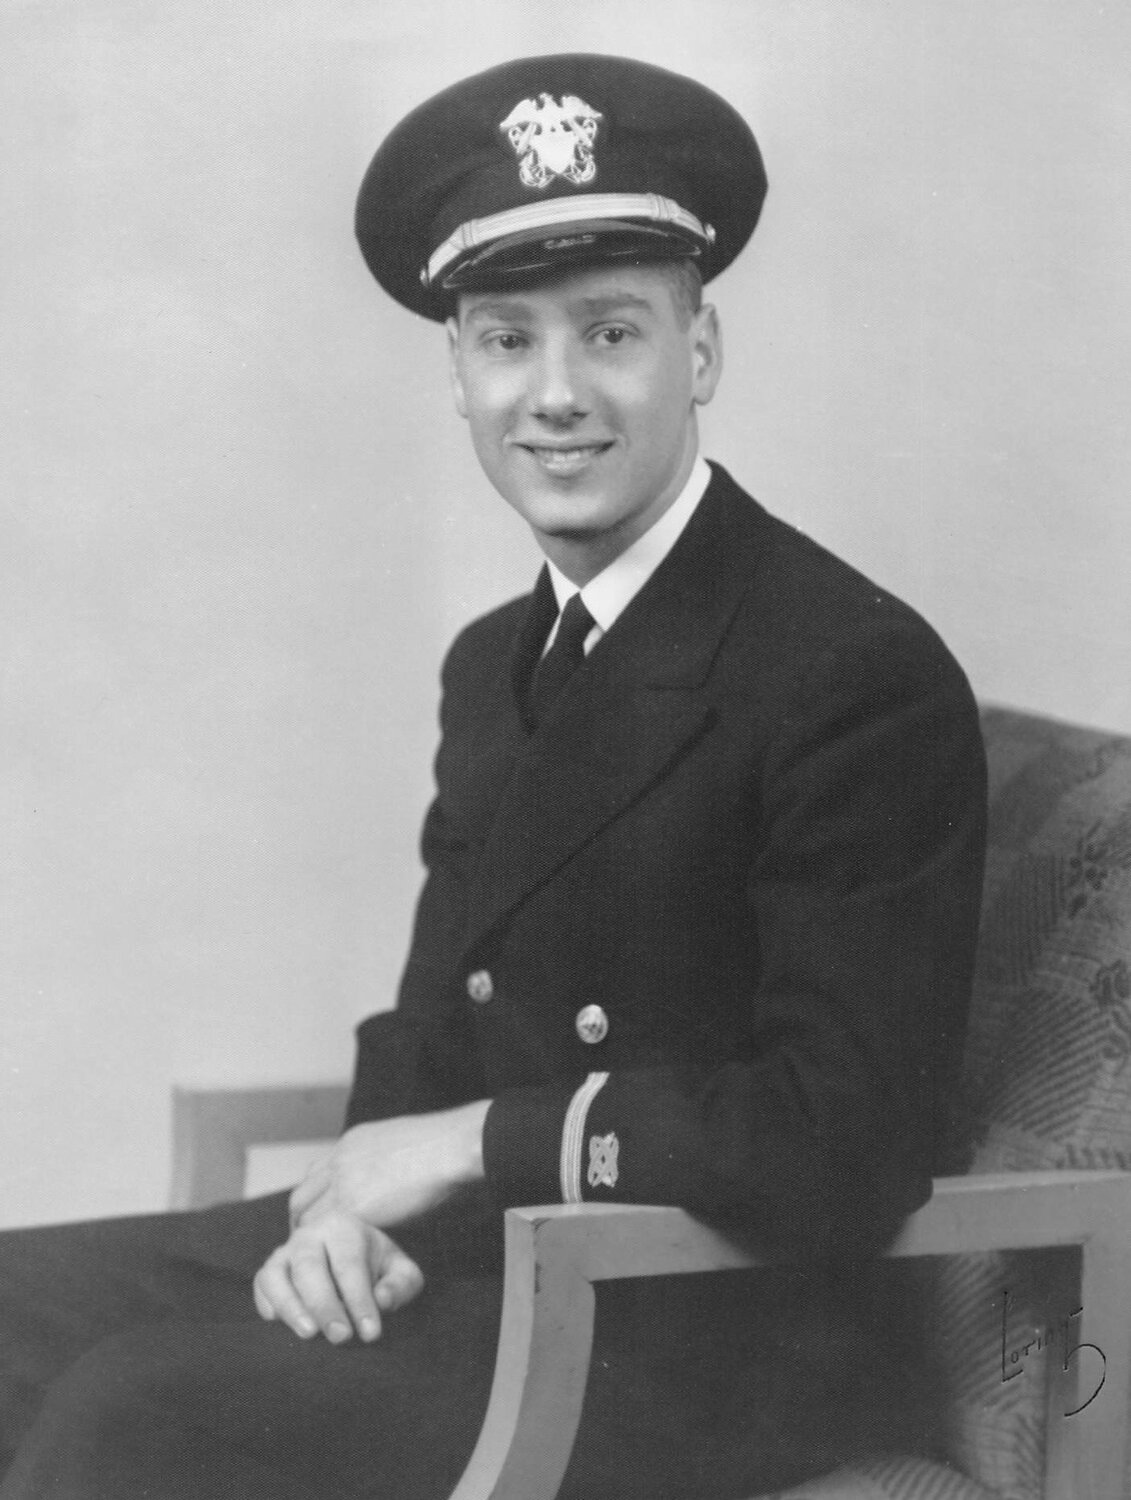 Bernie Ditchik during his time in the U.S. Navy during World War II.